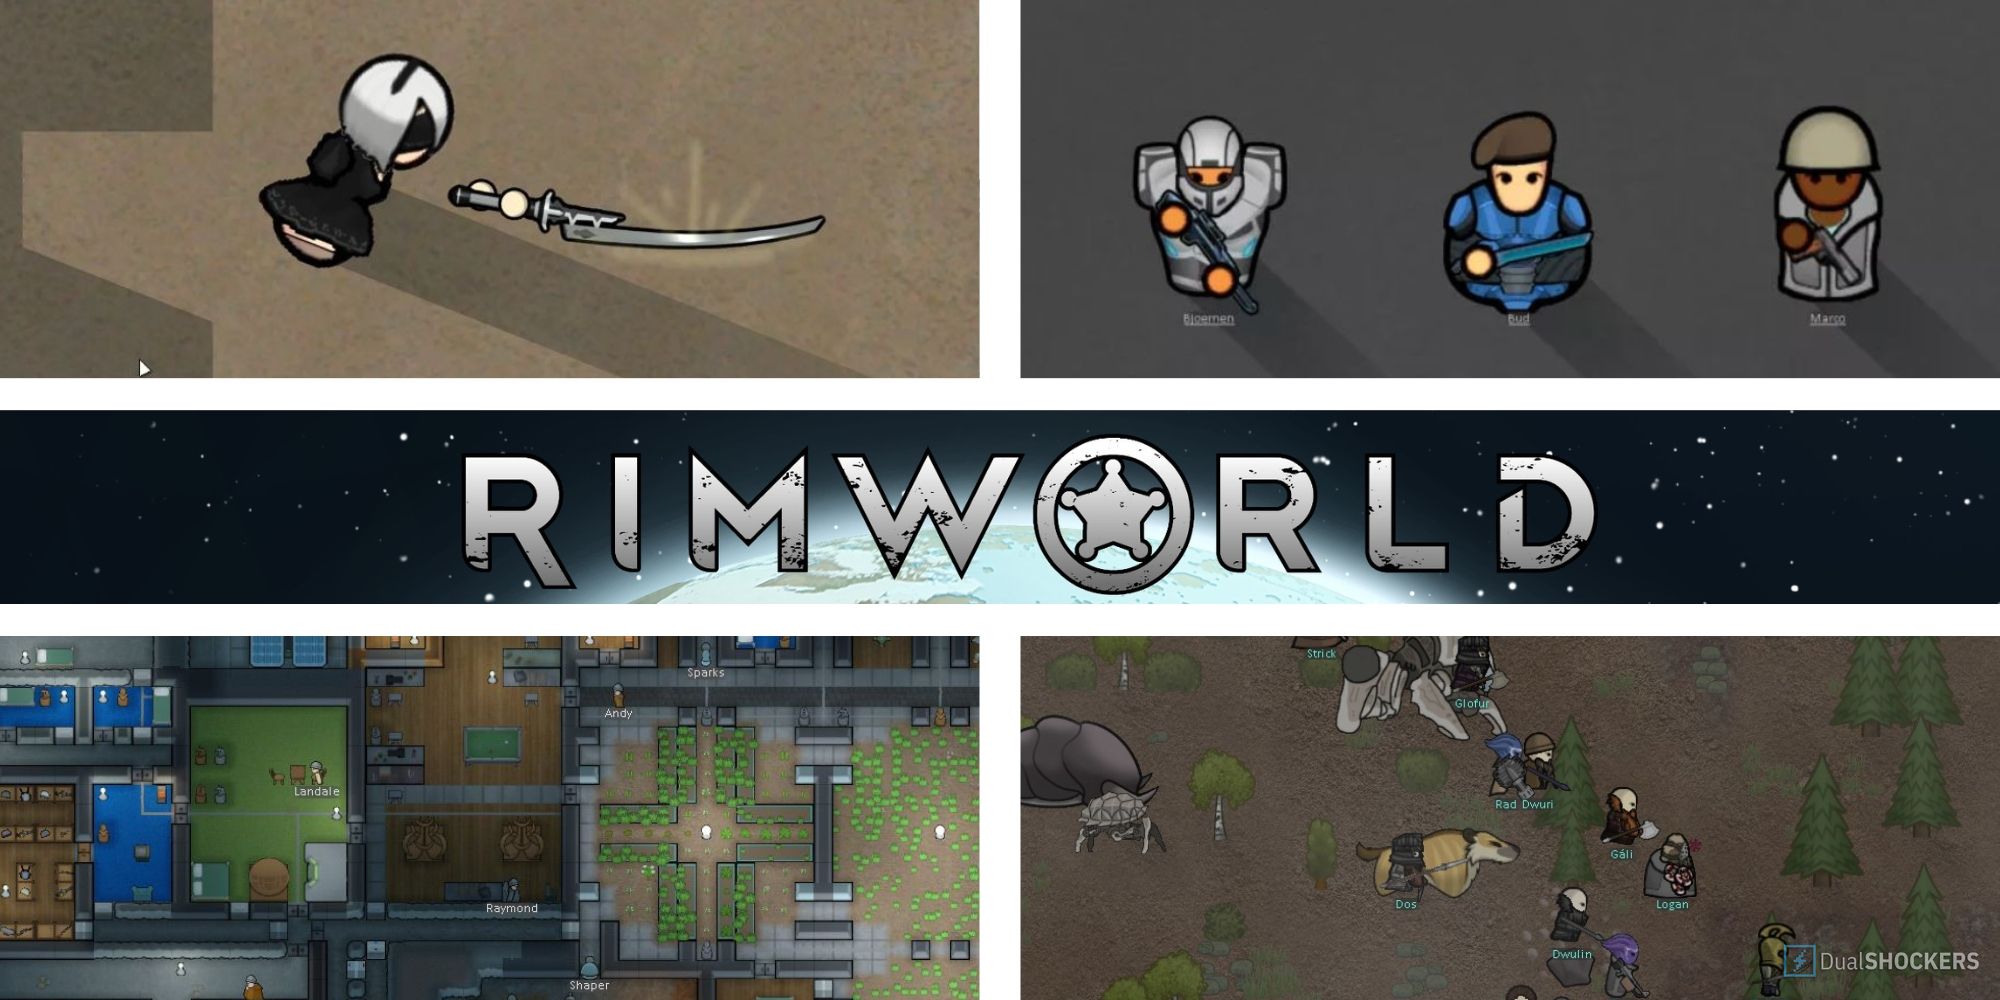 2 images of RimWorld pawns with weapons, one of a base, one of a caravan, with the RimWorld logo in the center